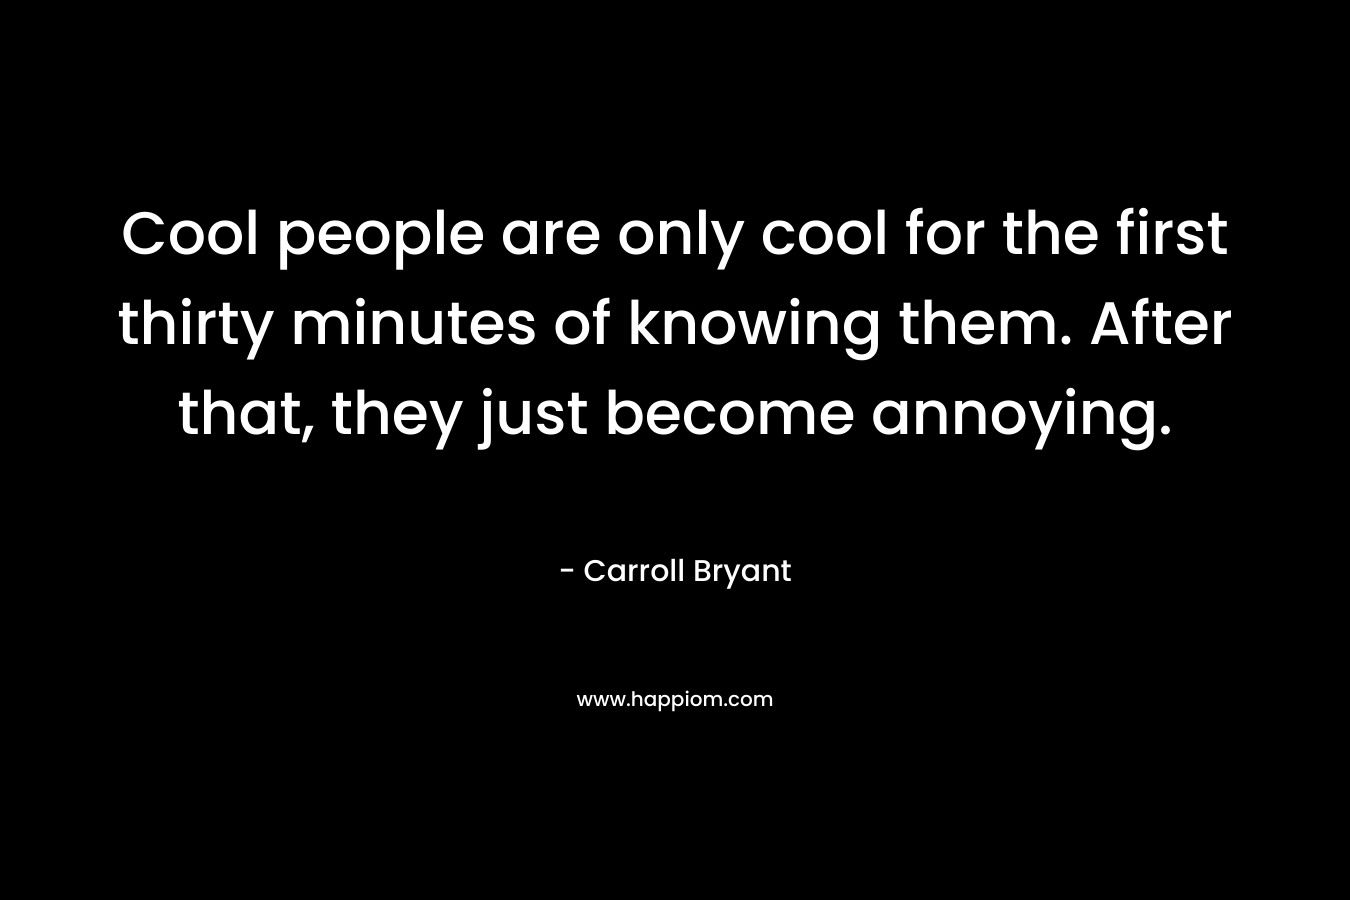 Cool people are only cool for the first thirty minutes of knowing them. After that, they just become annoying.